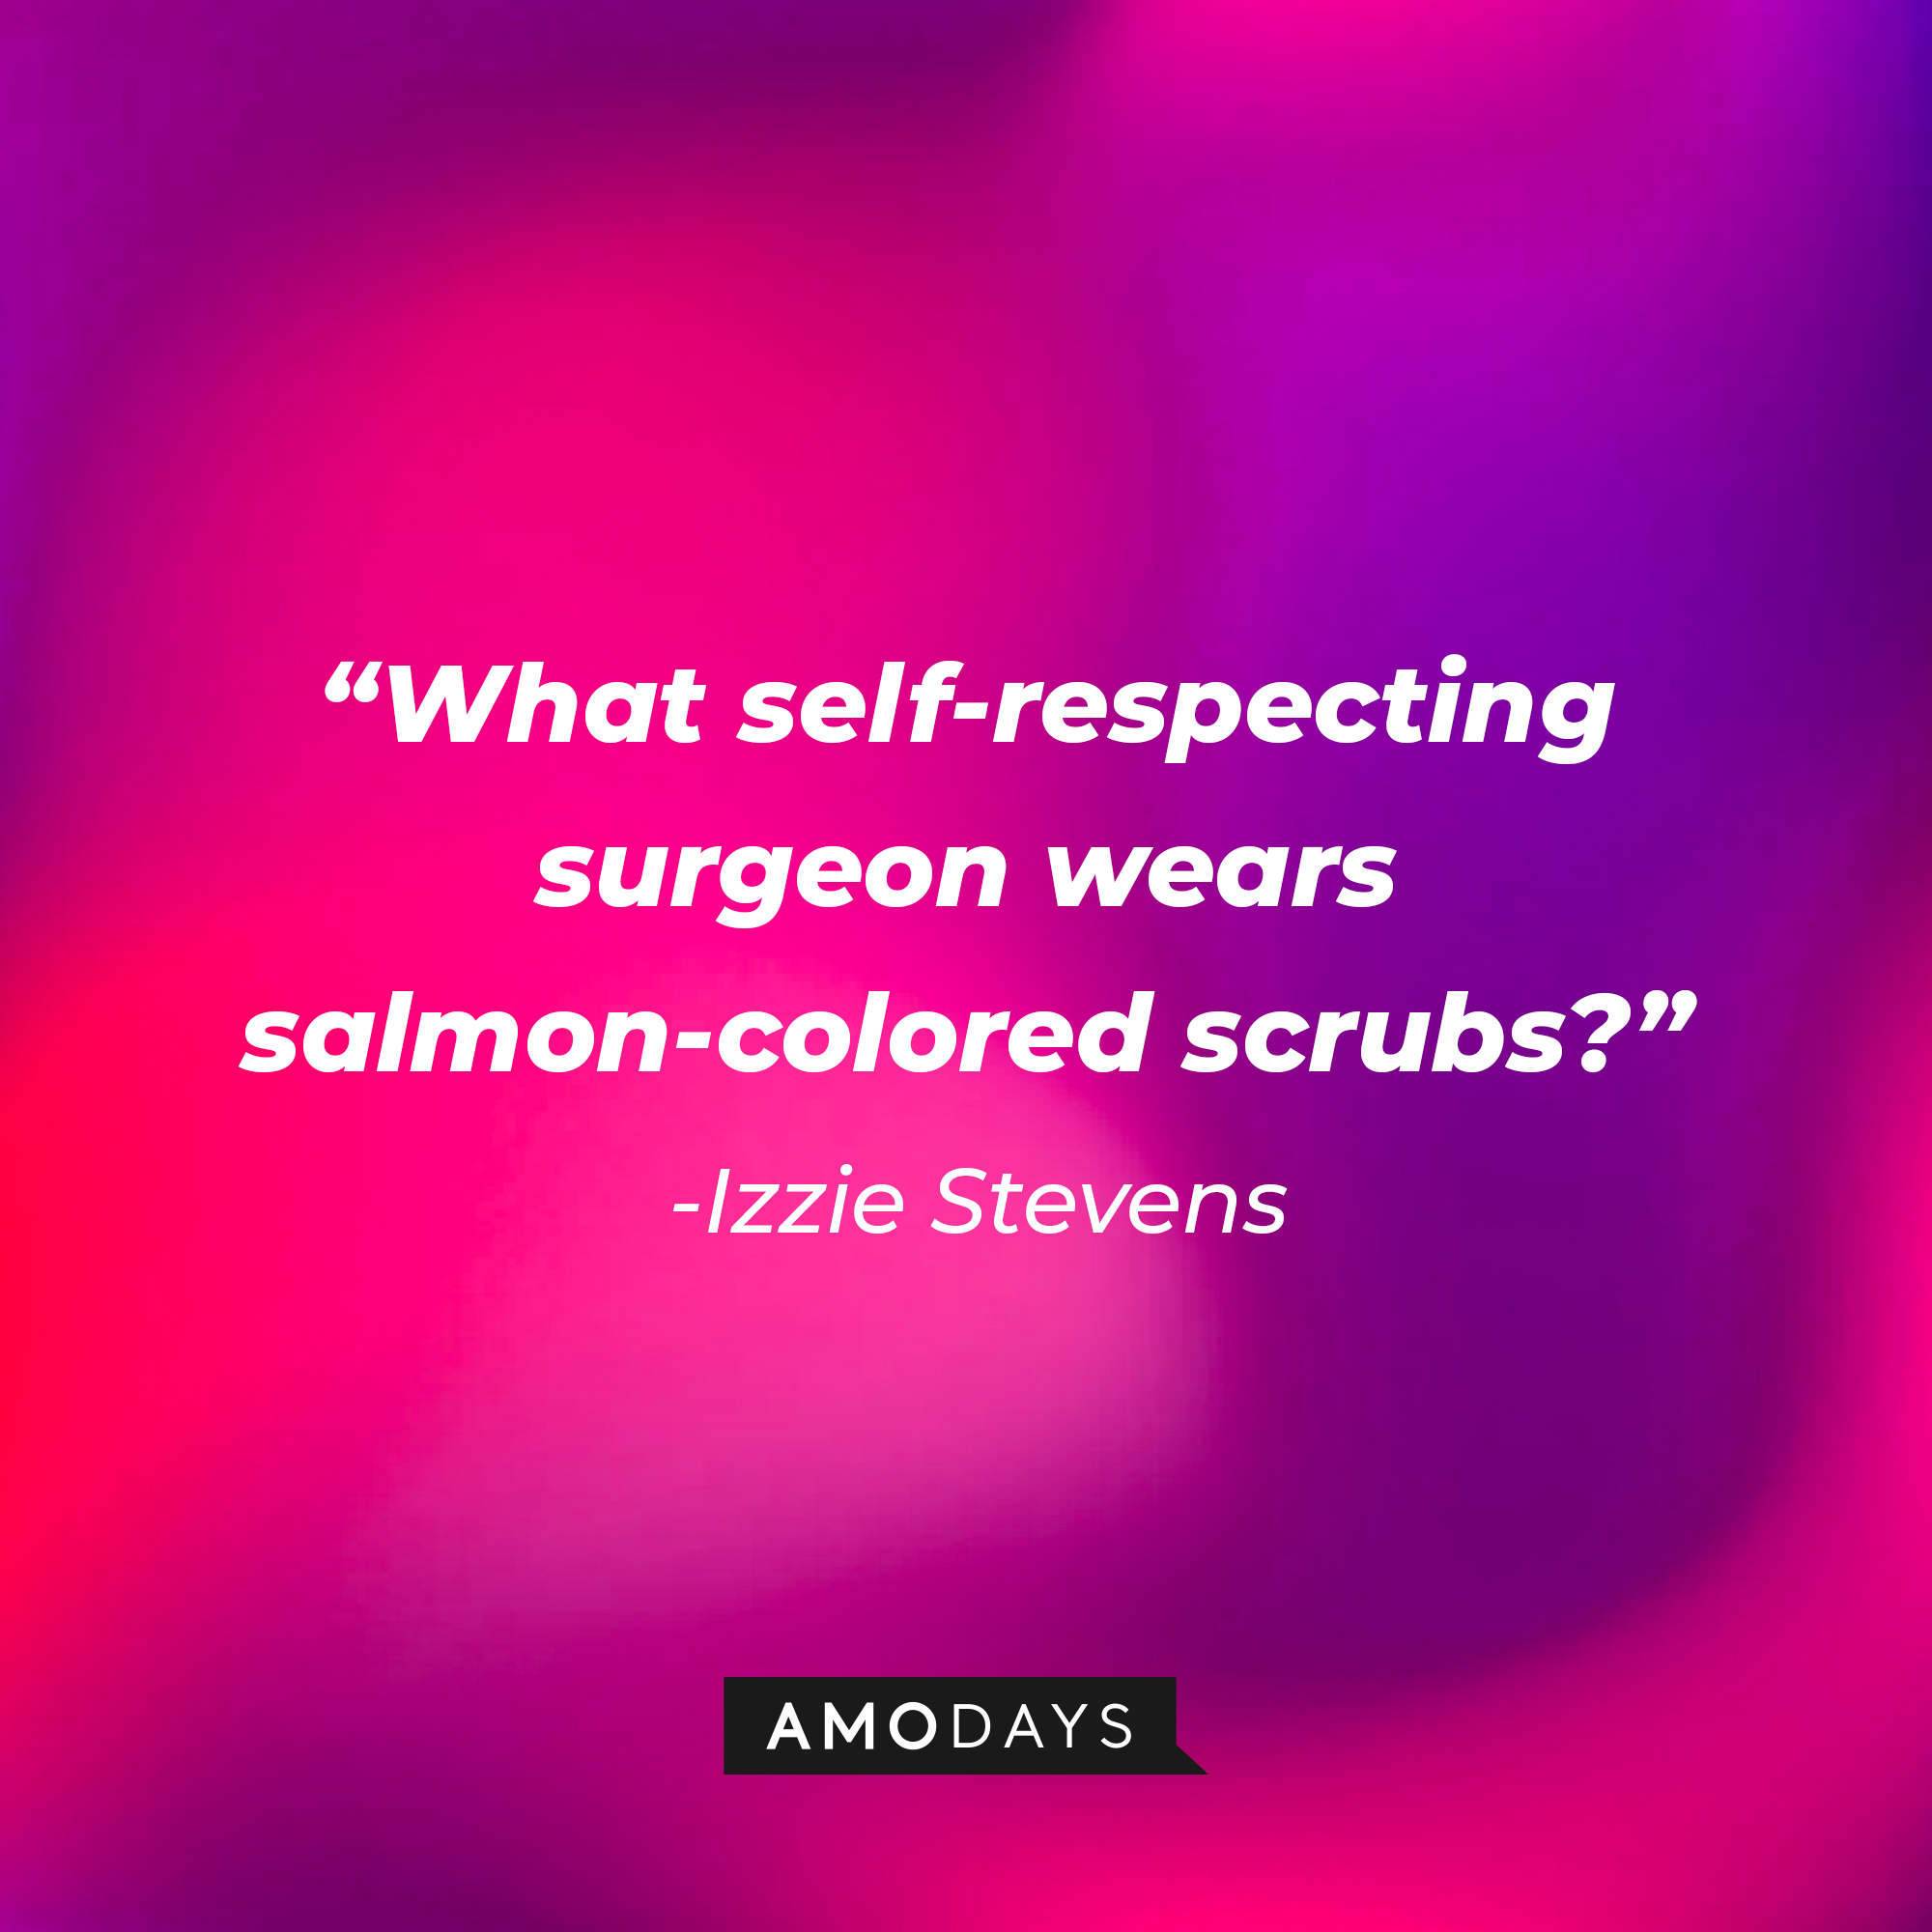 Izzie Stevens' quote: "What self-respecting surgeon wears salmon-colored scrubs?" | Image: Amodays